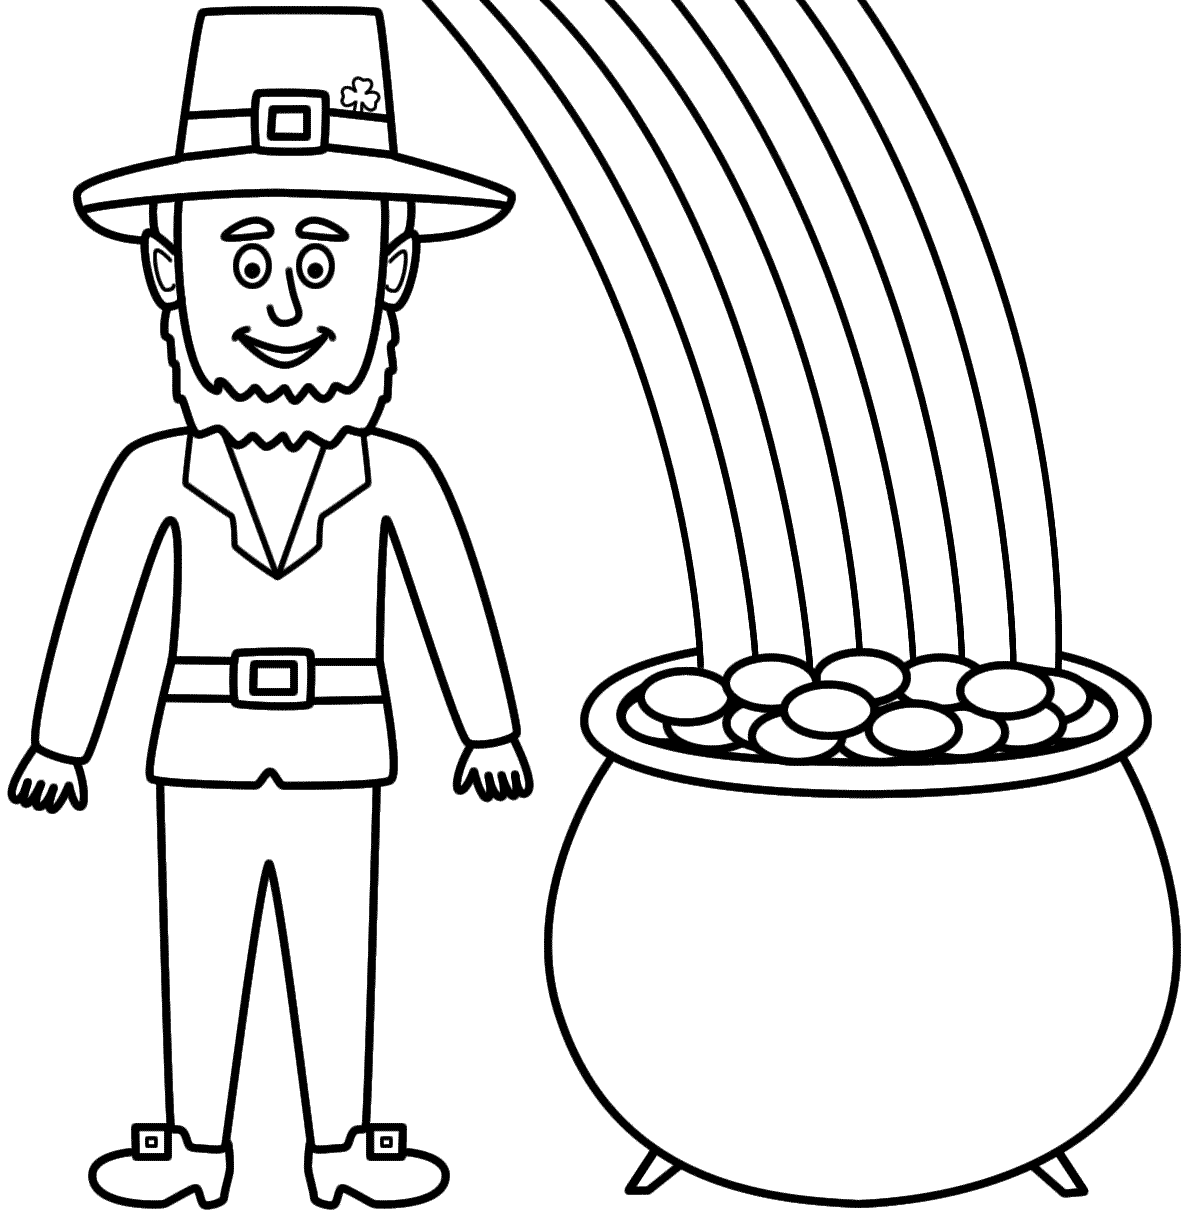 466 Simple Rainbow And Pot Of Gold Coloring Page for Adult